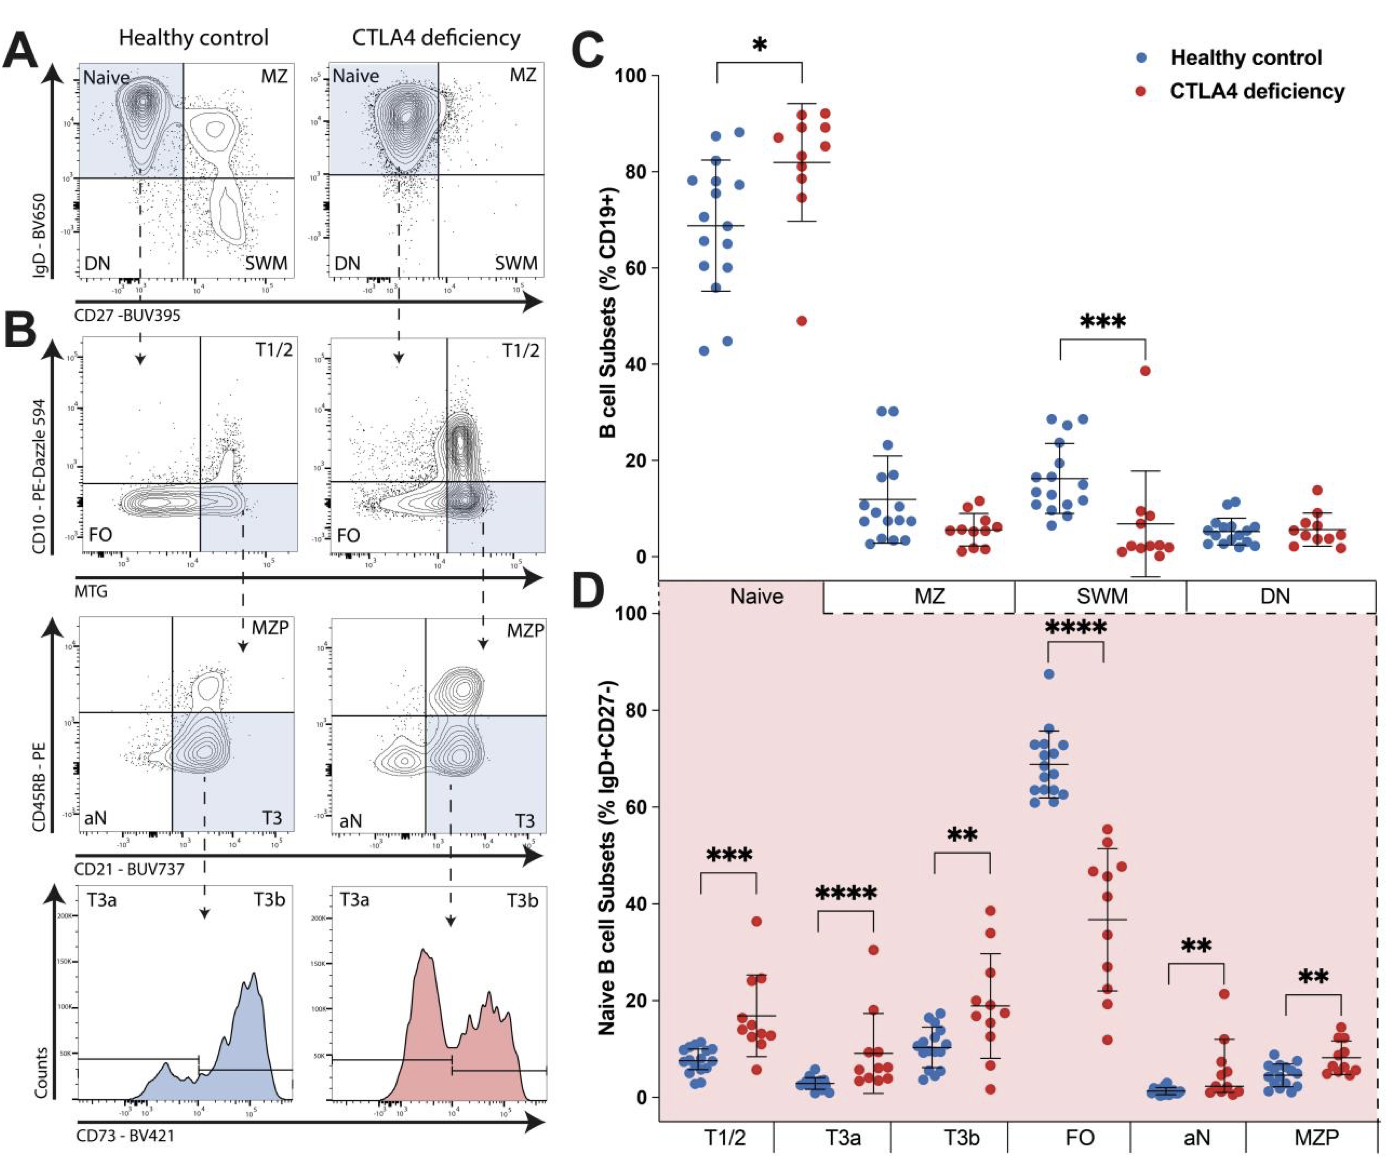 Congenital T cell activation impairs transitional to follicular B cell maturation in humans